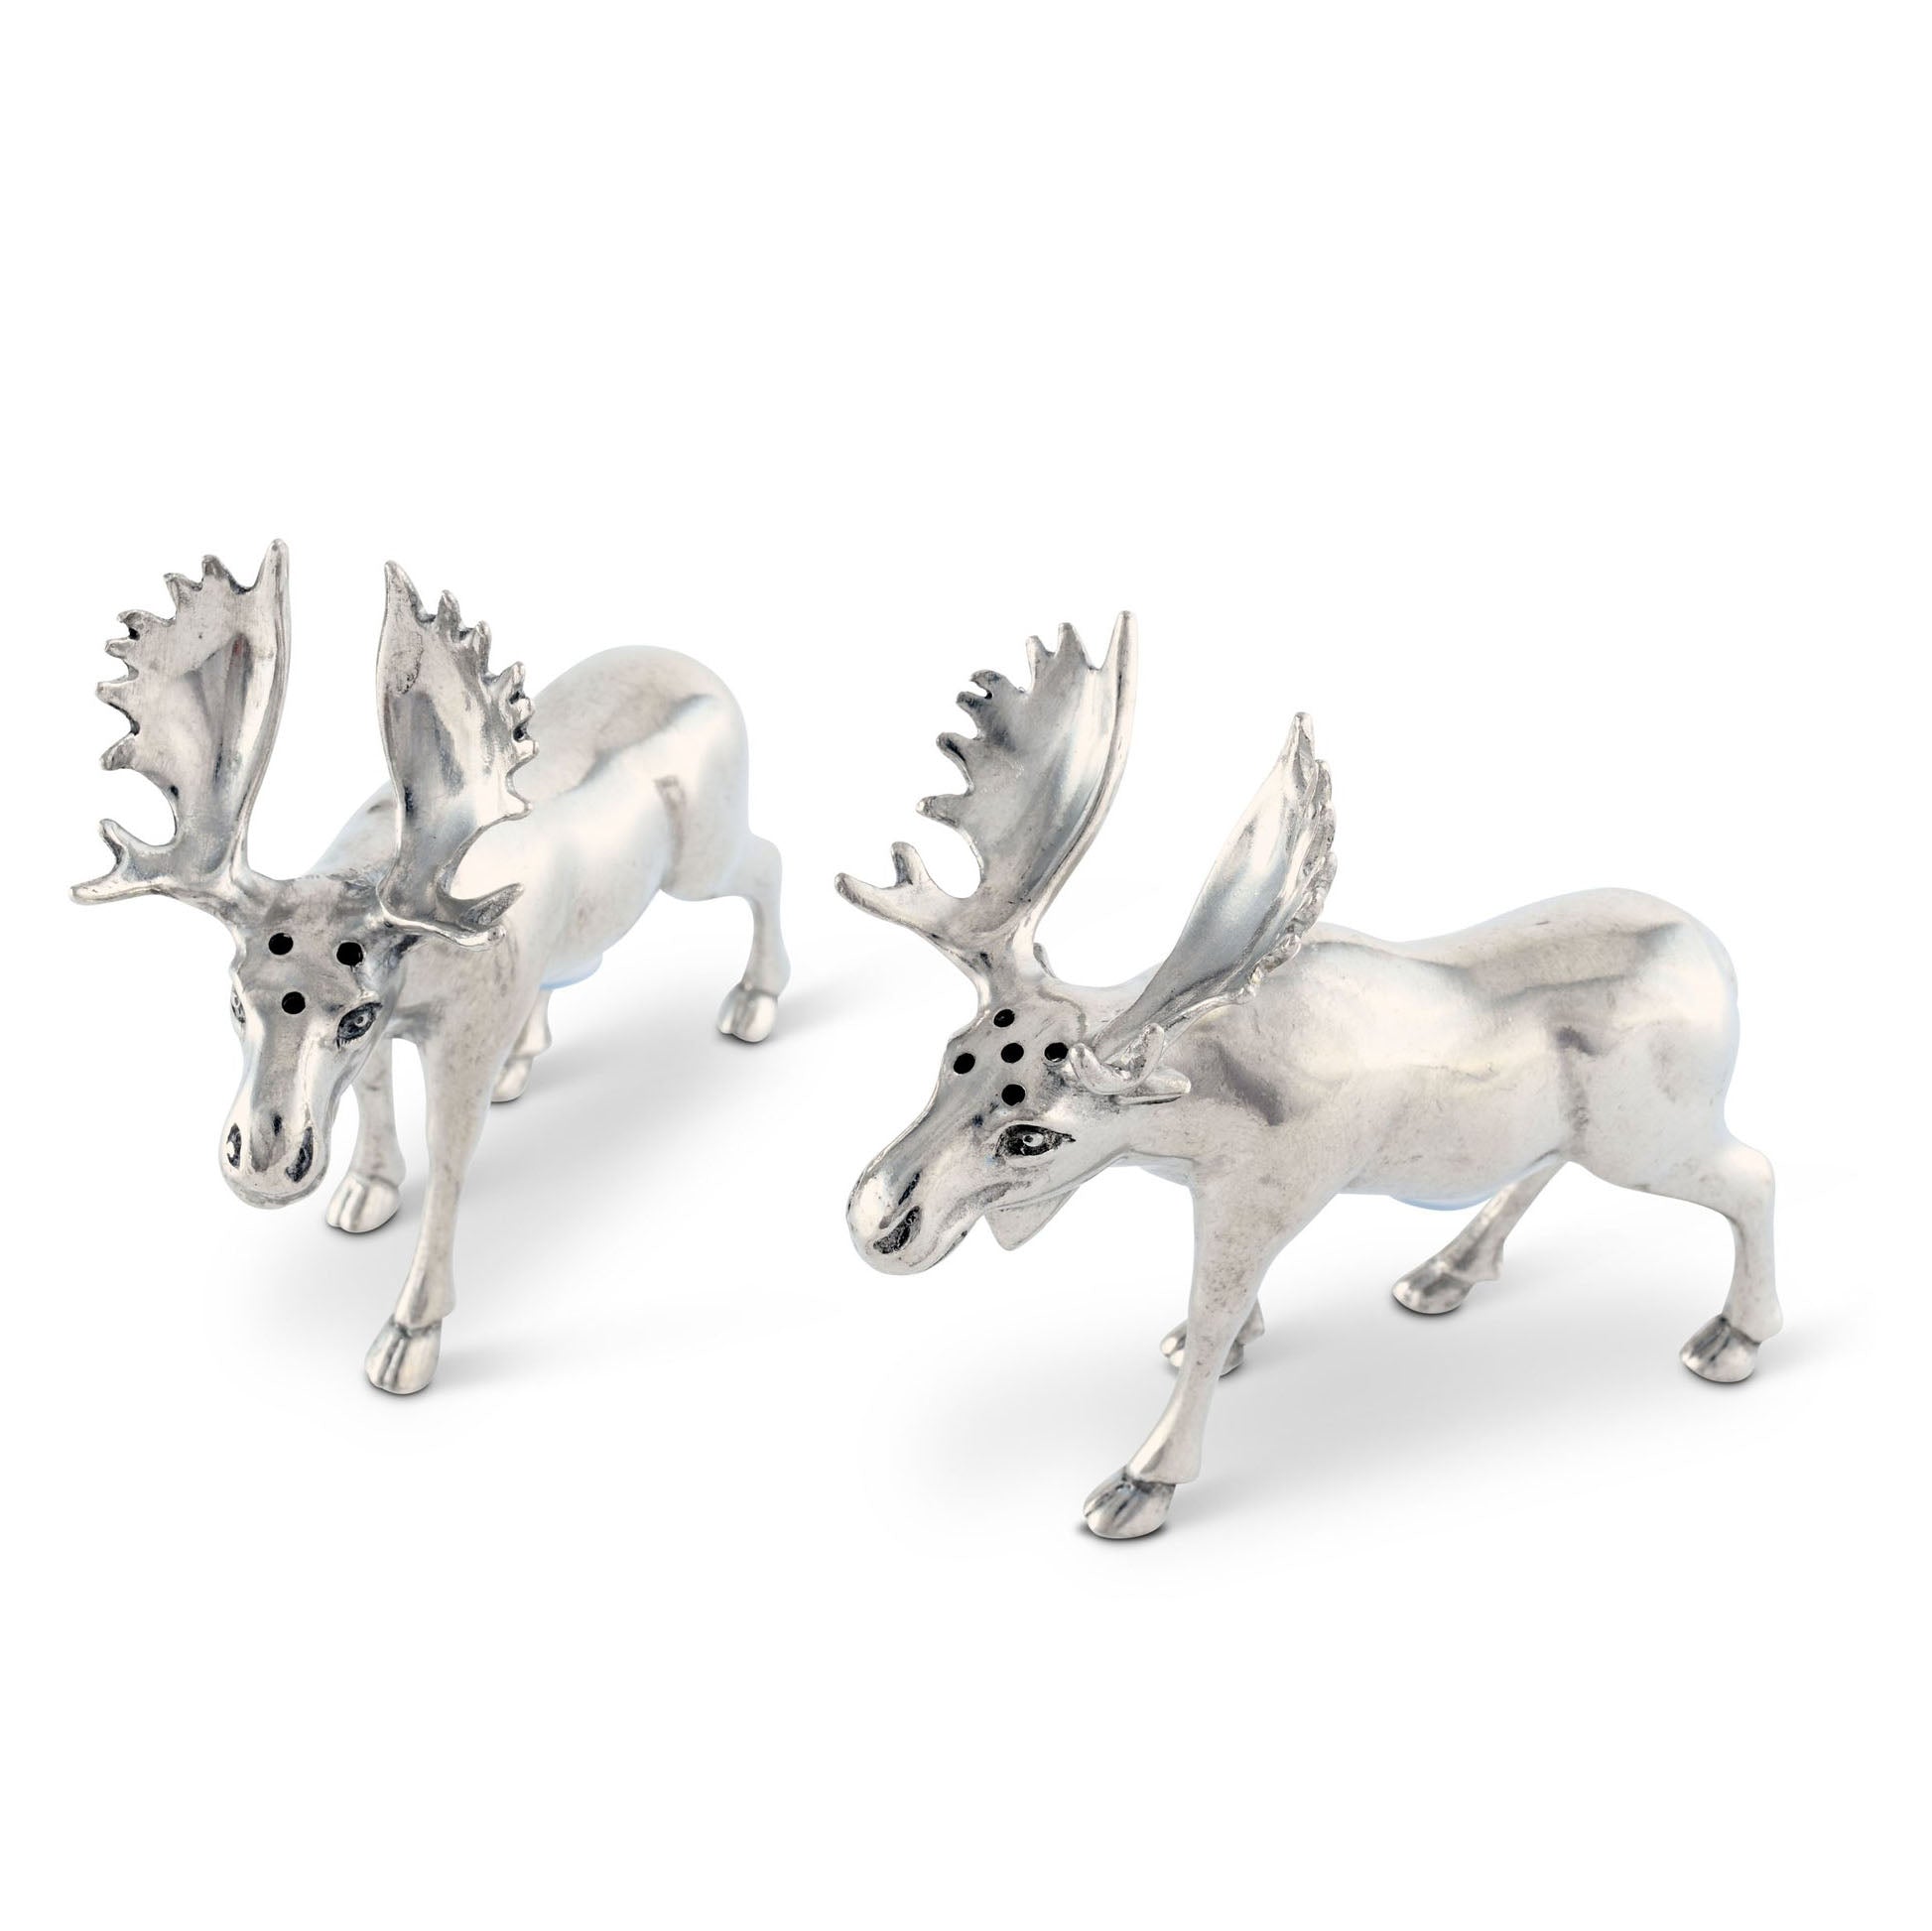 Pewter Moose Salt and Pepper Shakers